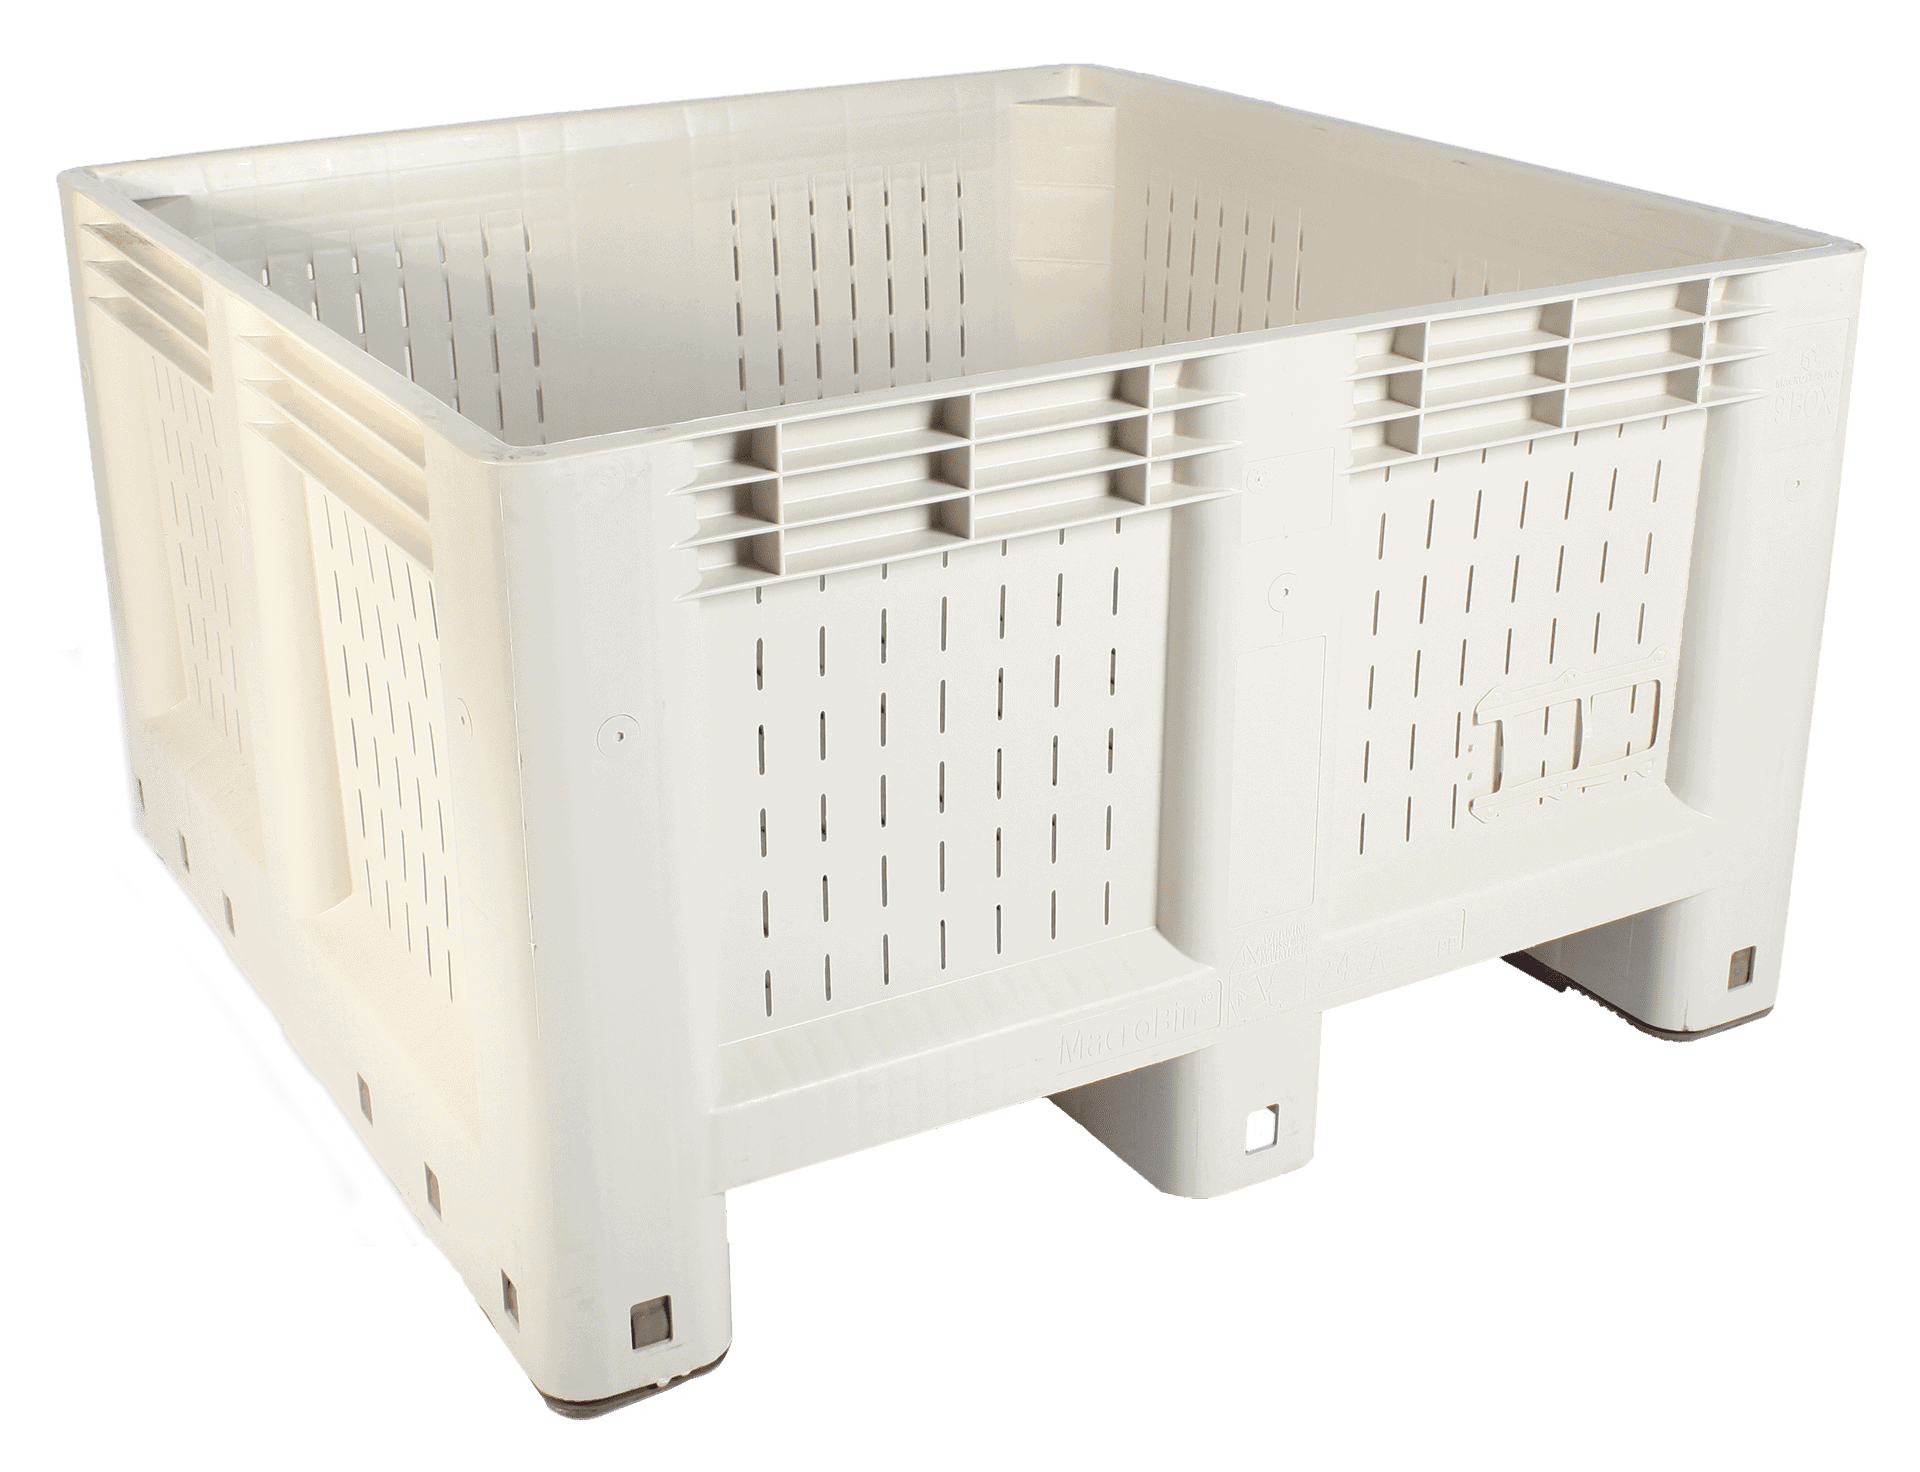 Plastic Bins for Agriculture, Macro Agricultural Bins